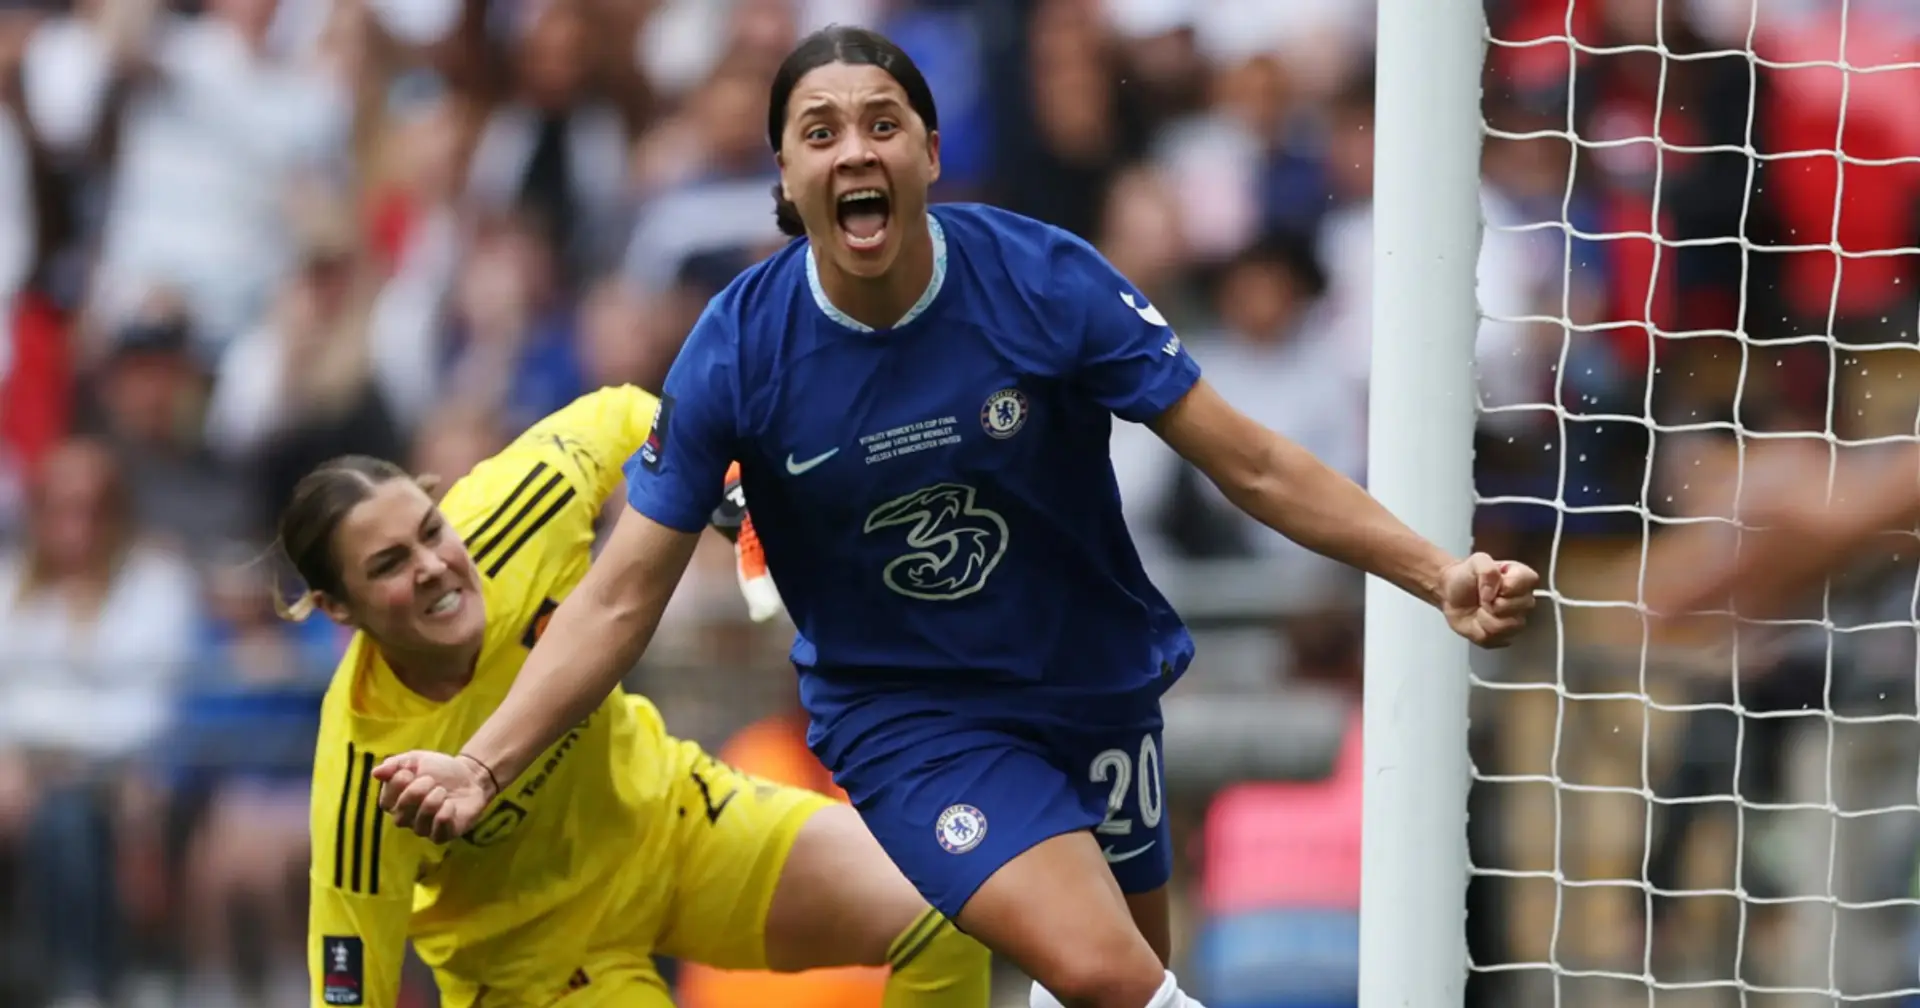 Chelsea Women beat Man United to win third FA Cup in a row